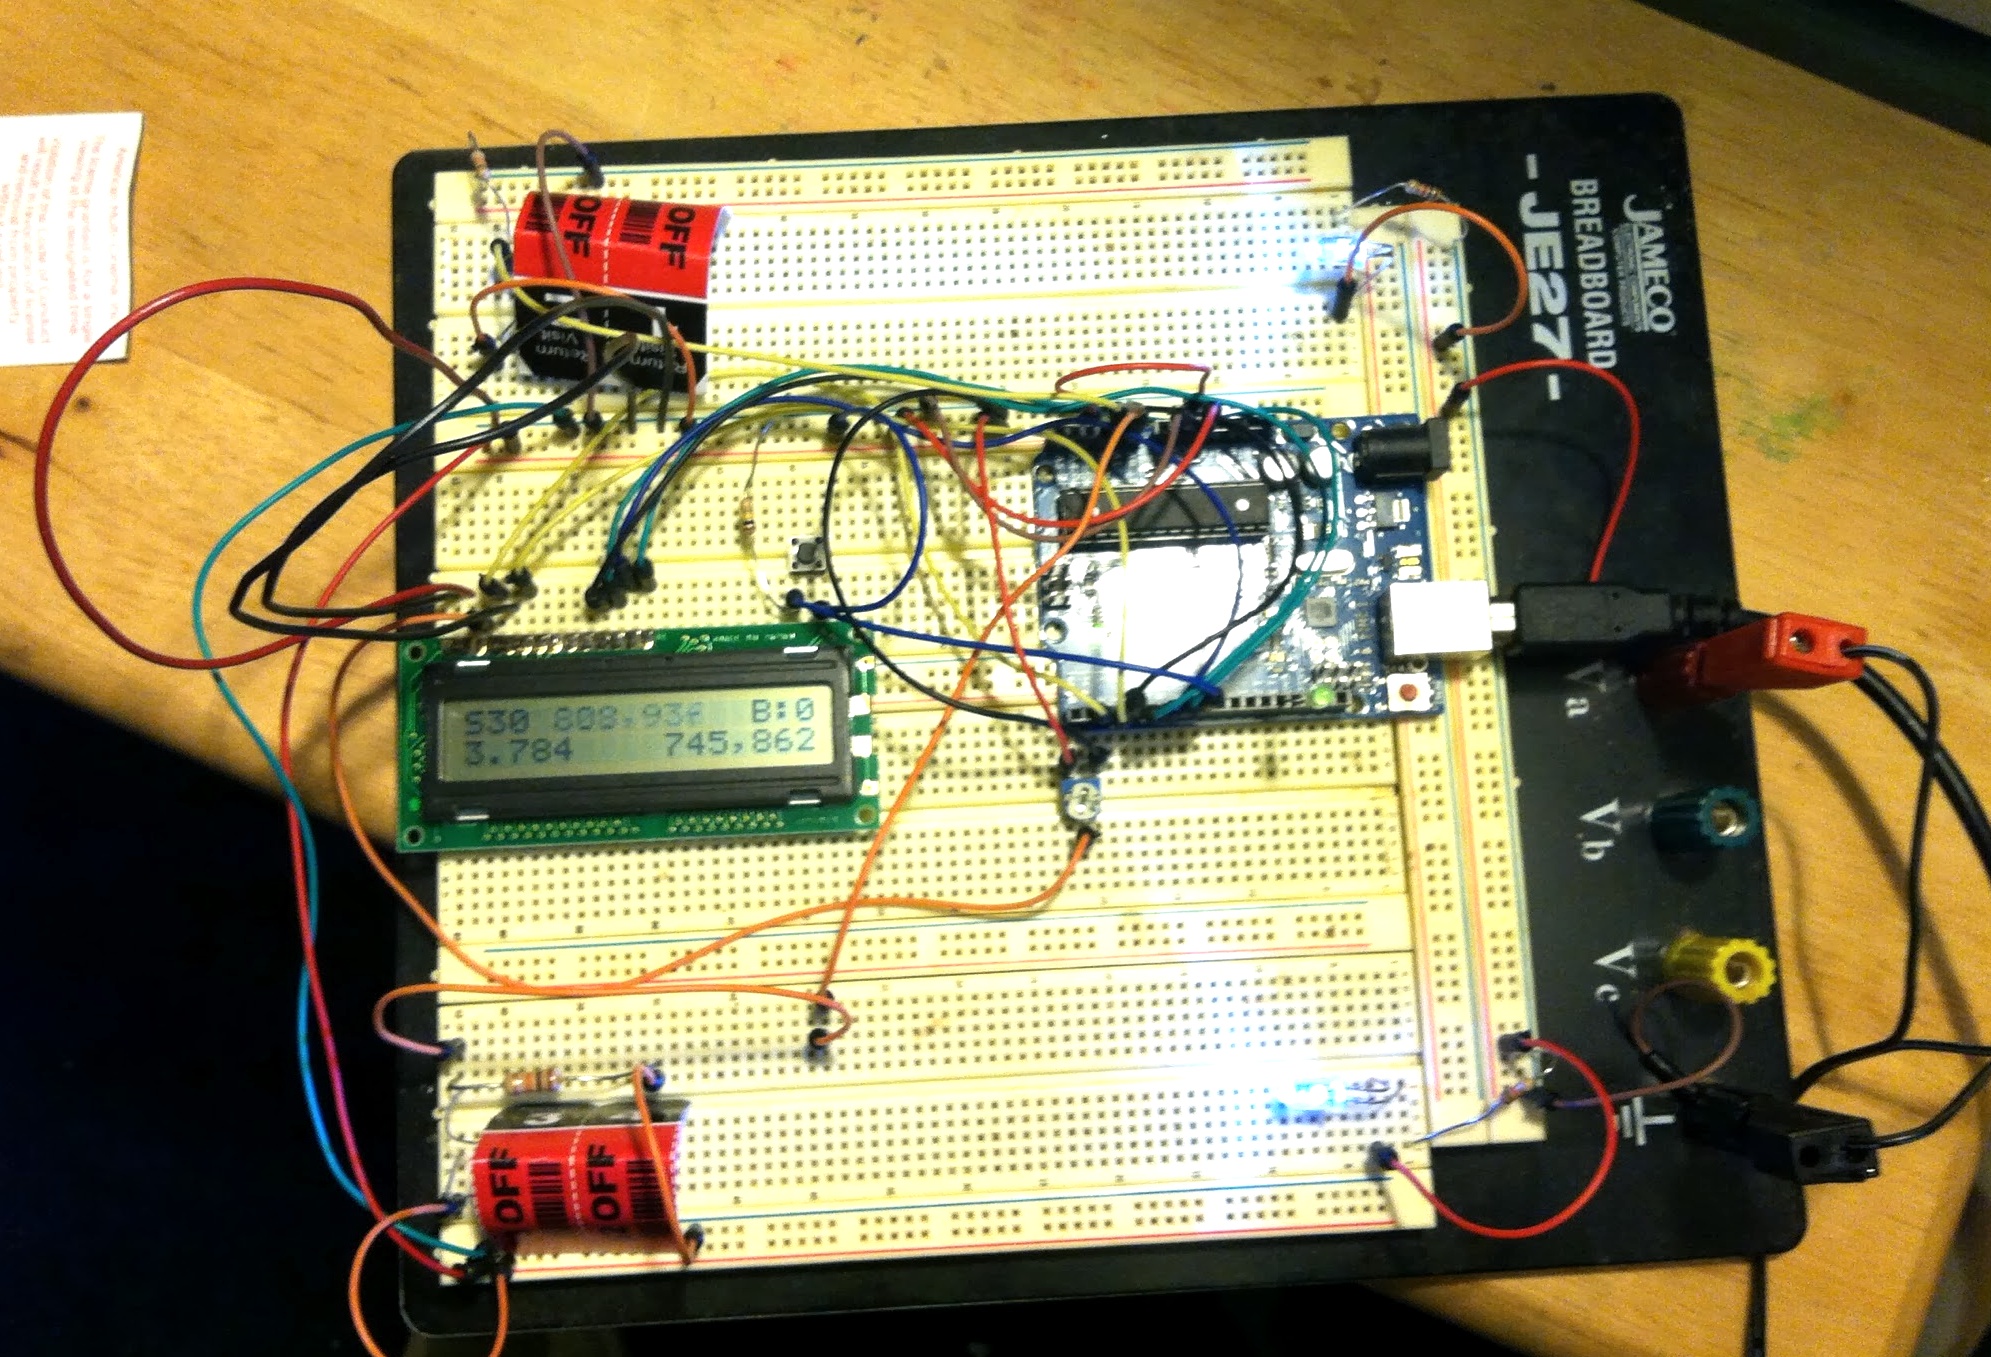 Timer with LCD and two LED/photoresistor pairs to detect start and stop times, with Sketch#30 running